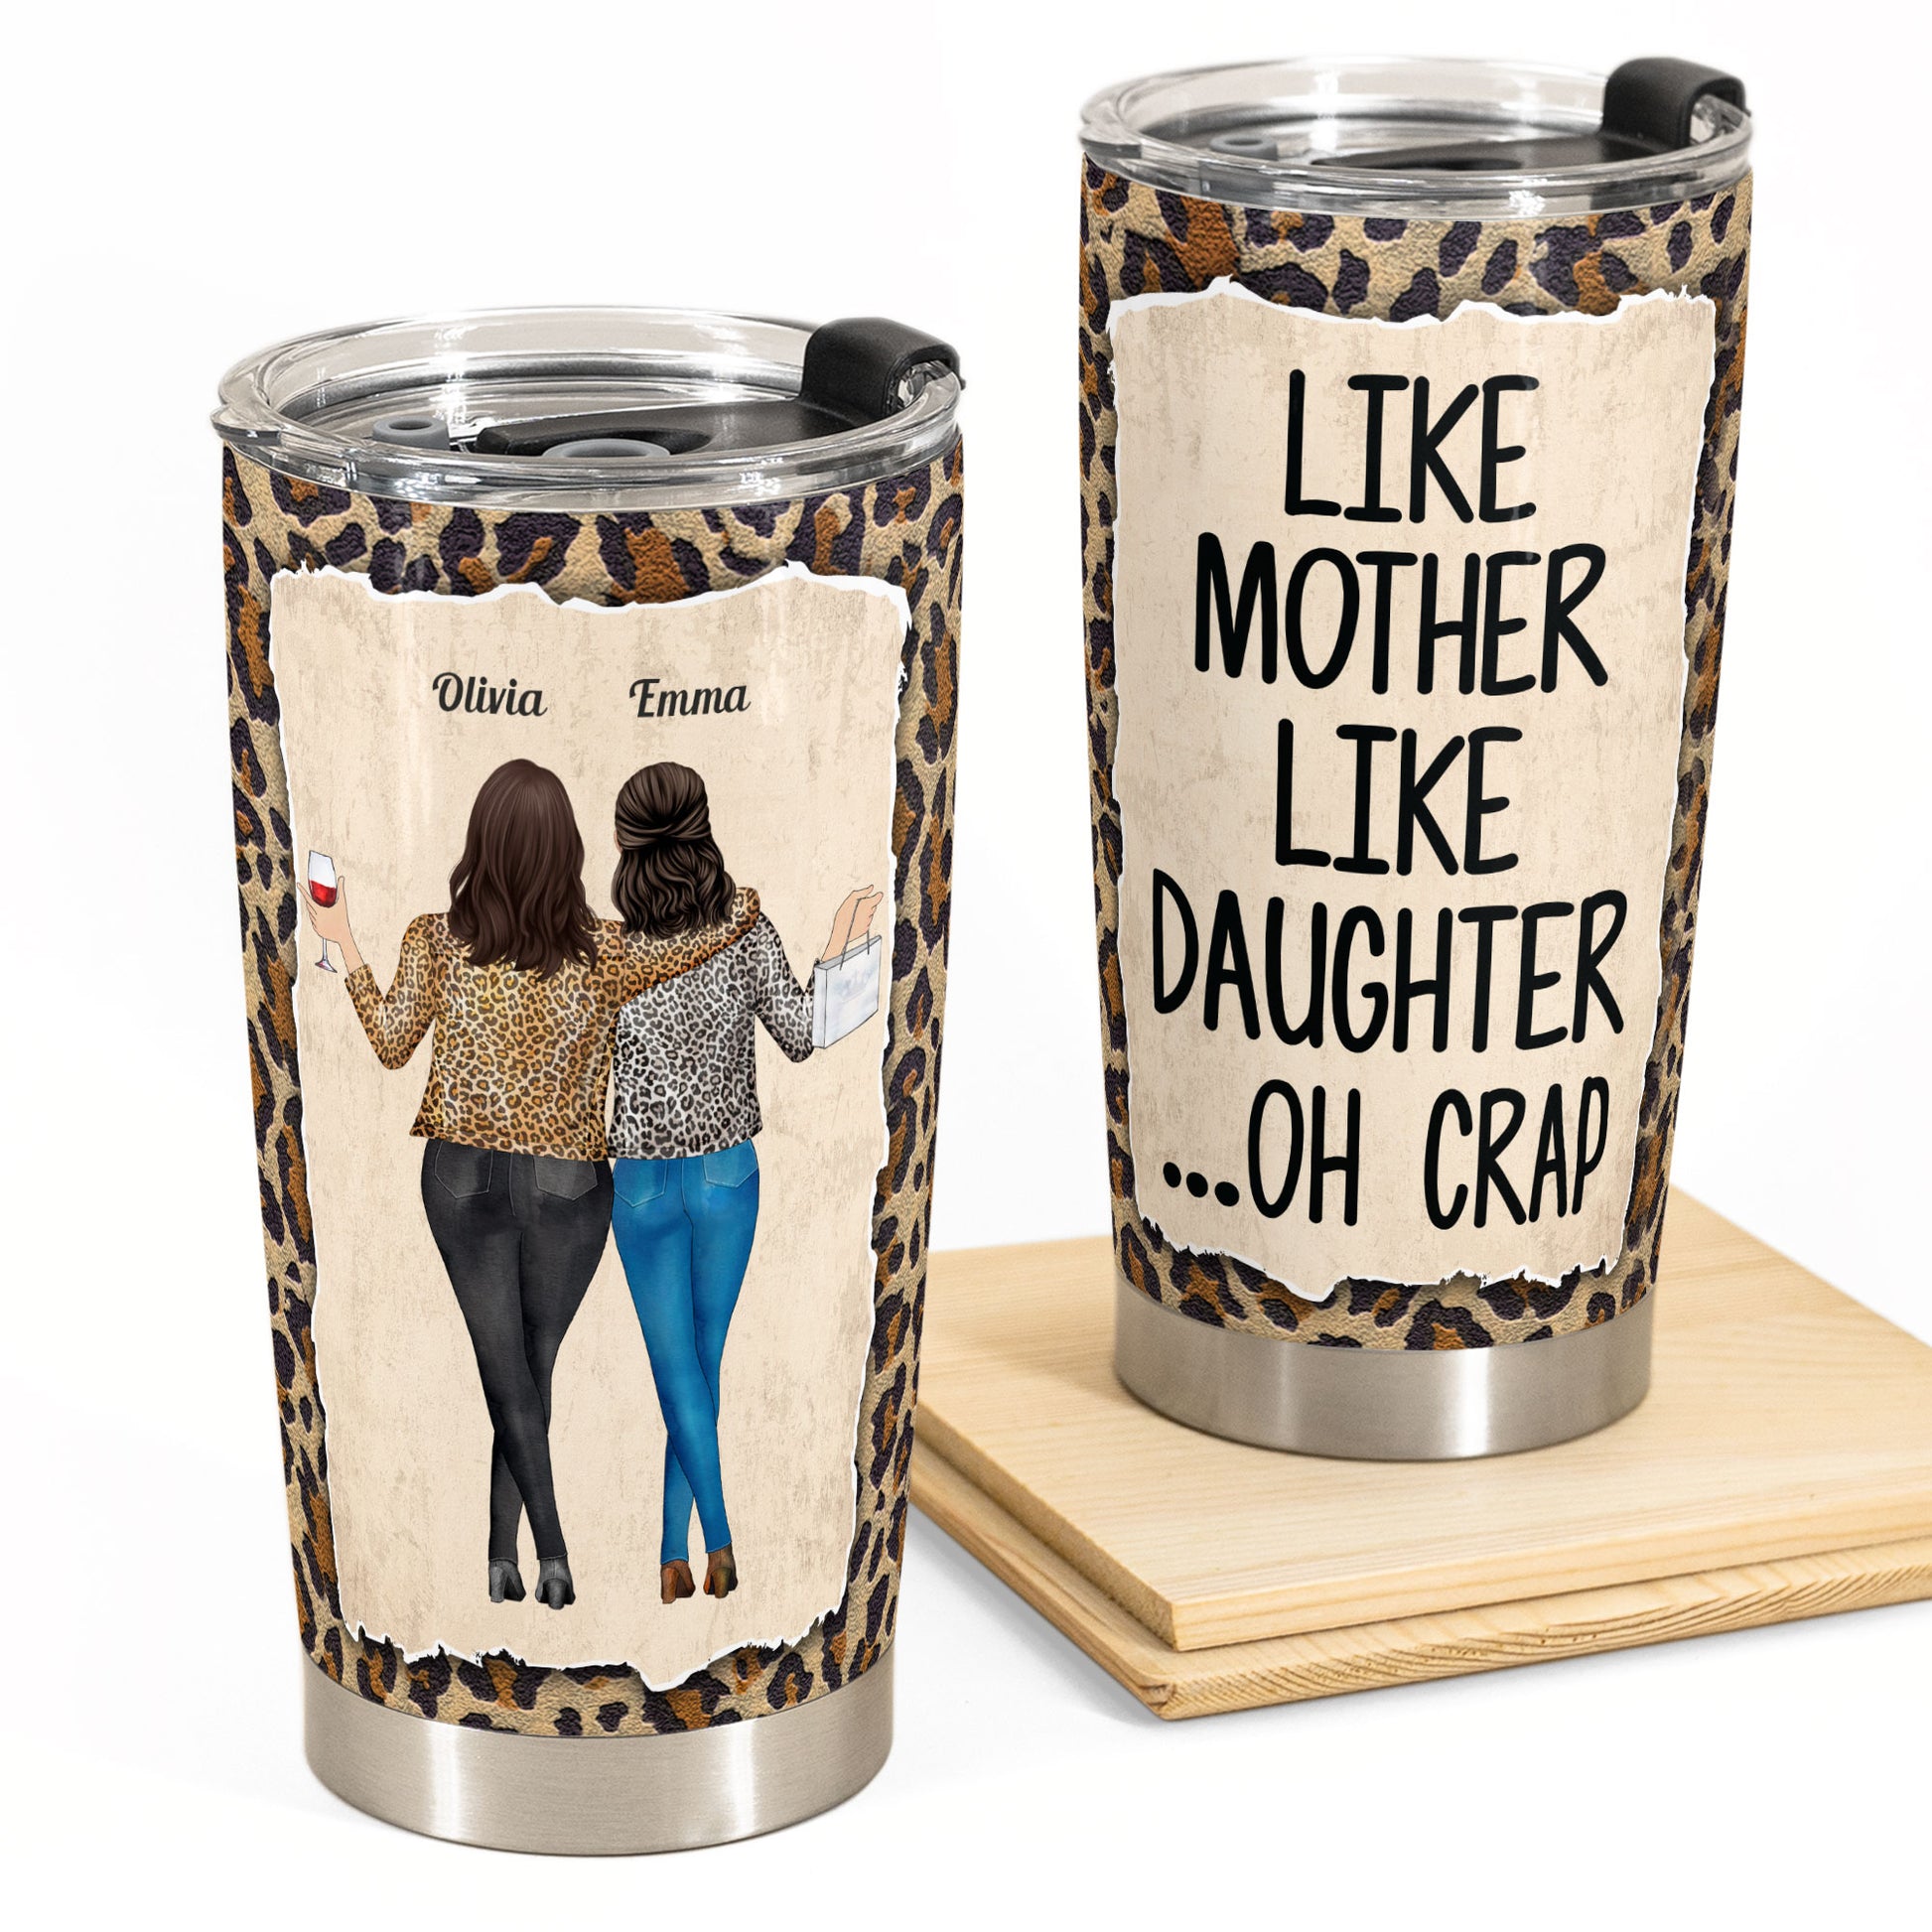 Tumbler for Mama, Mothers Day Gifts for Women from Daughter Son, Best Mom  Ever Birthday Christmas Gift Ideas, My Favorite Child Give Me This Cup